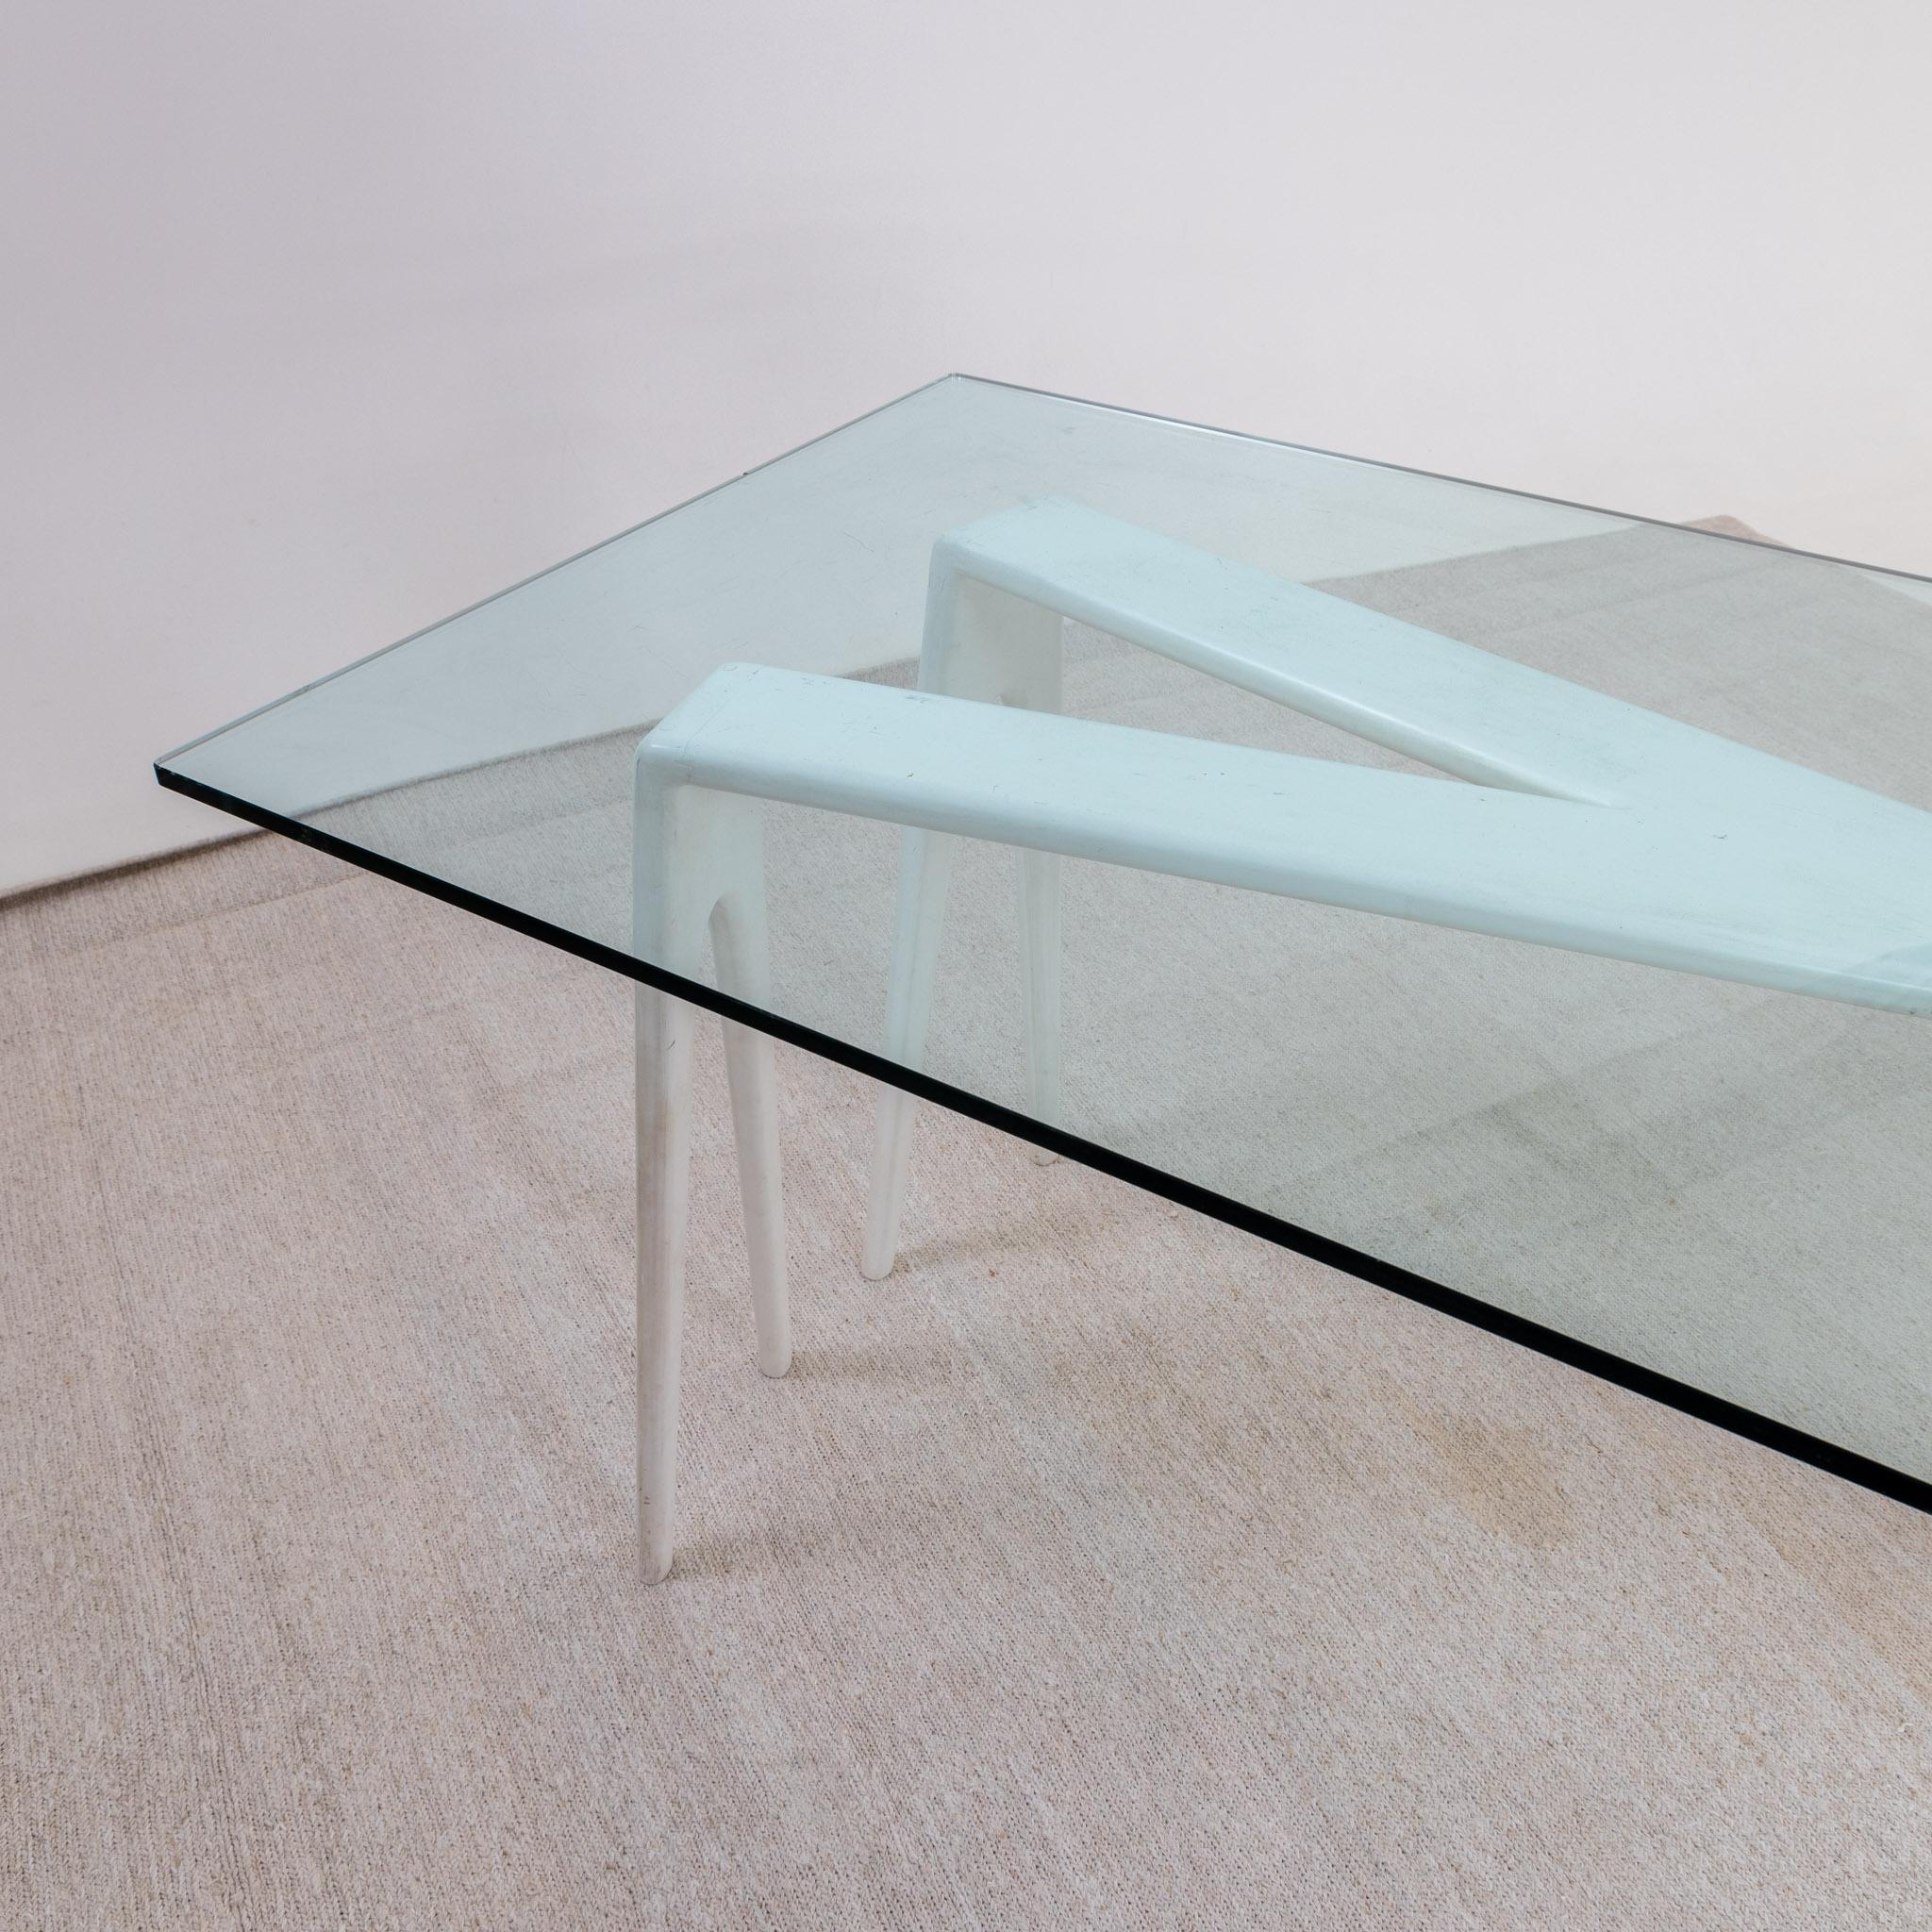 White Dining Table with Glass Top, Le Opere E i Giorni, Italy 20th Century In Good Condition For Sale In Greding, DE